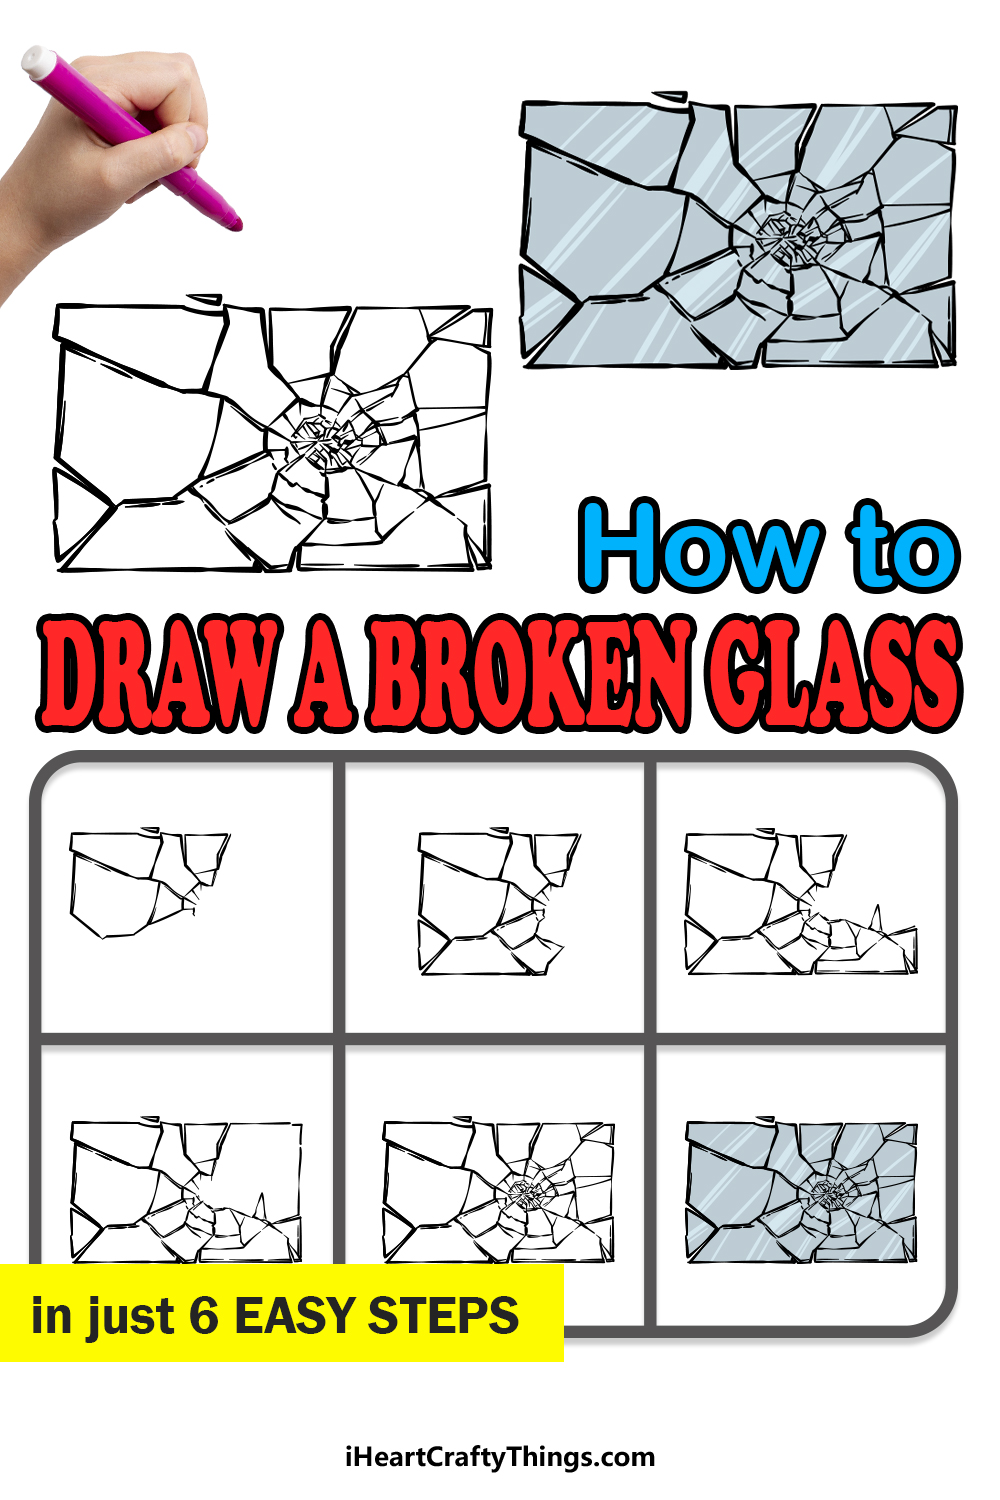 how to draw broken glass in 6 easy steps